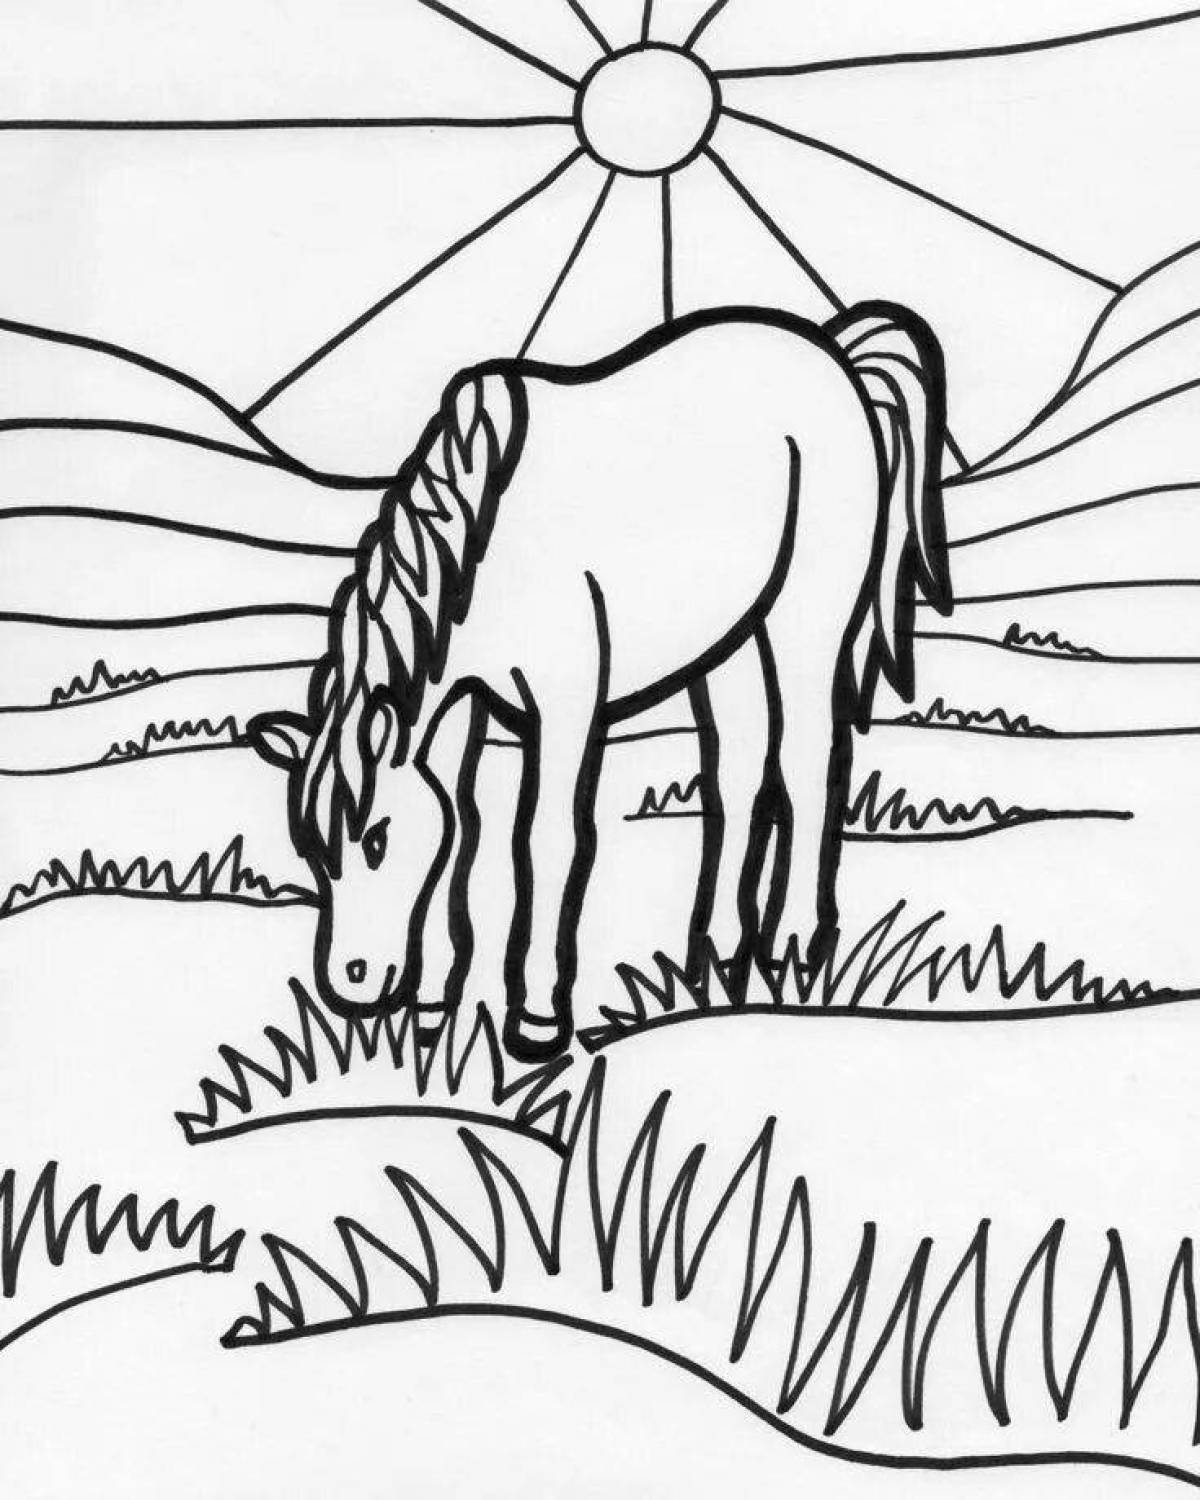 Coloring page flashing grazing horses